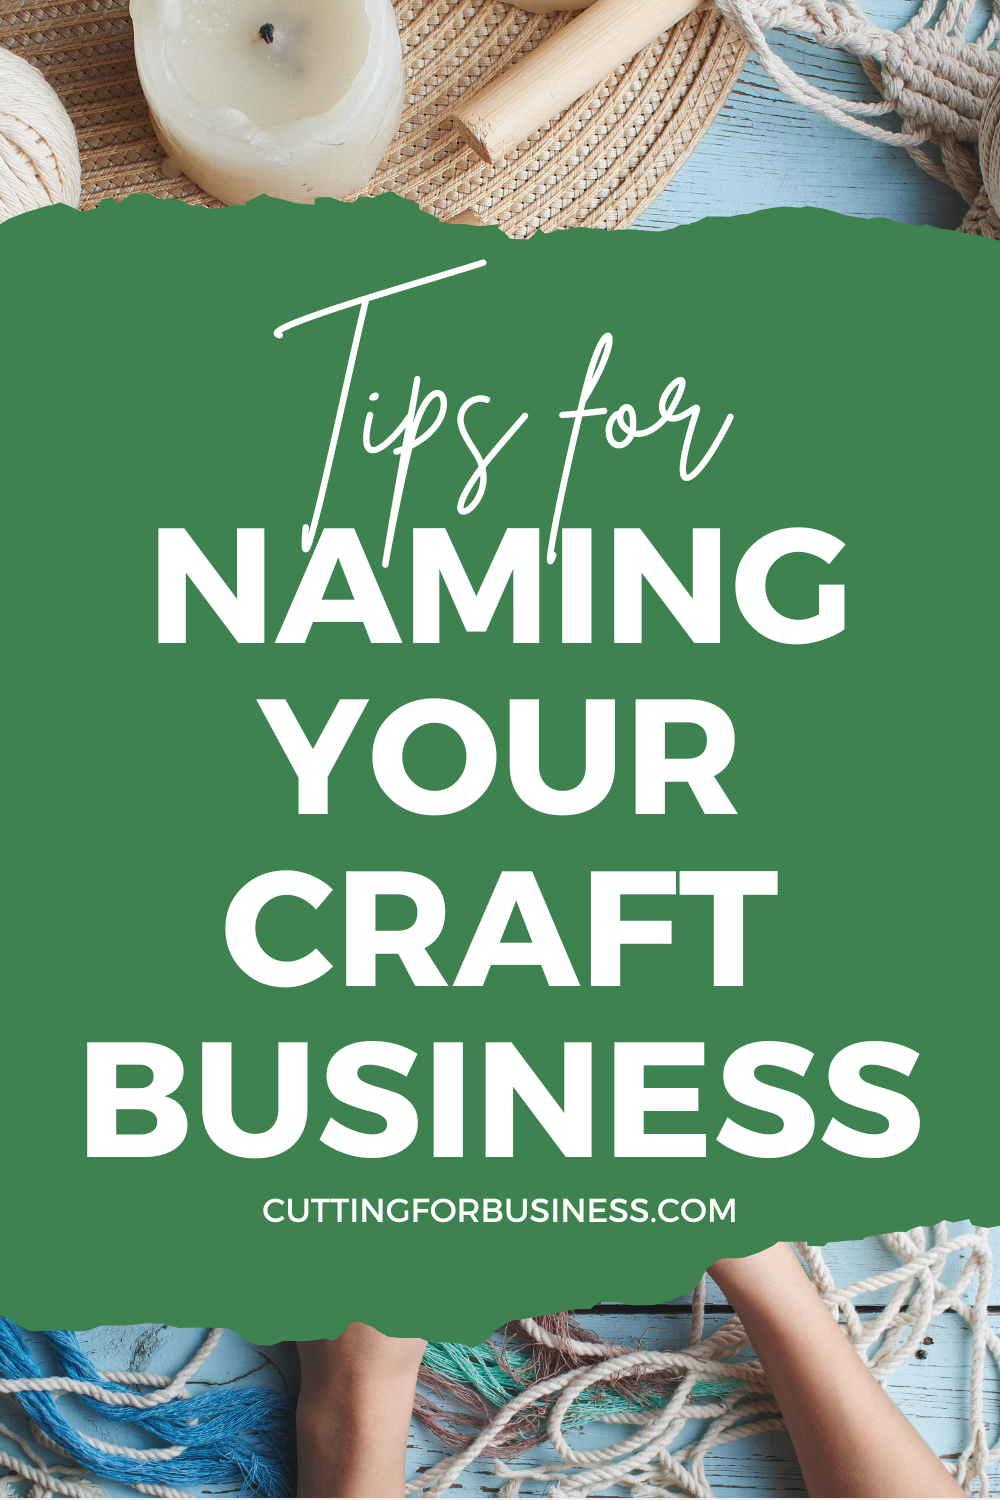 Tips for Naming Your Craft Business - cuttingforbusiness.com